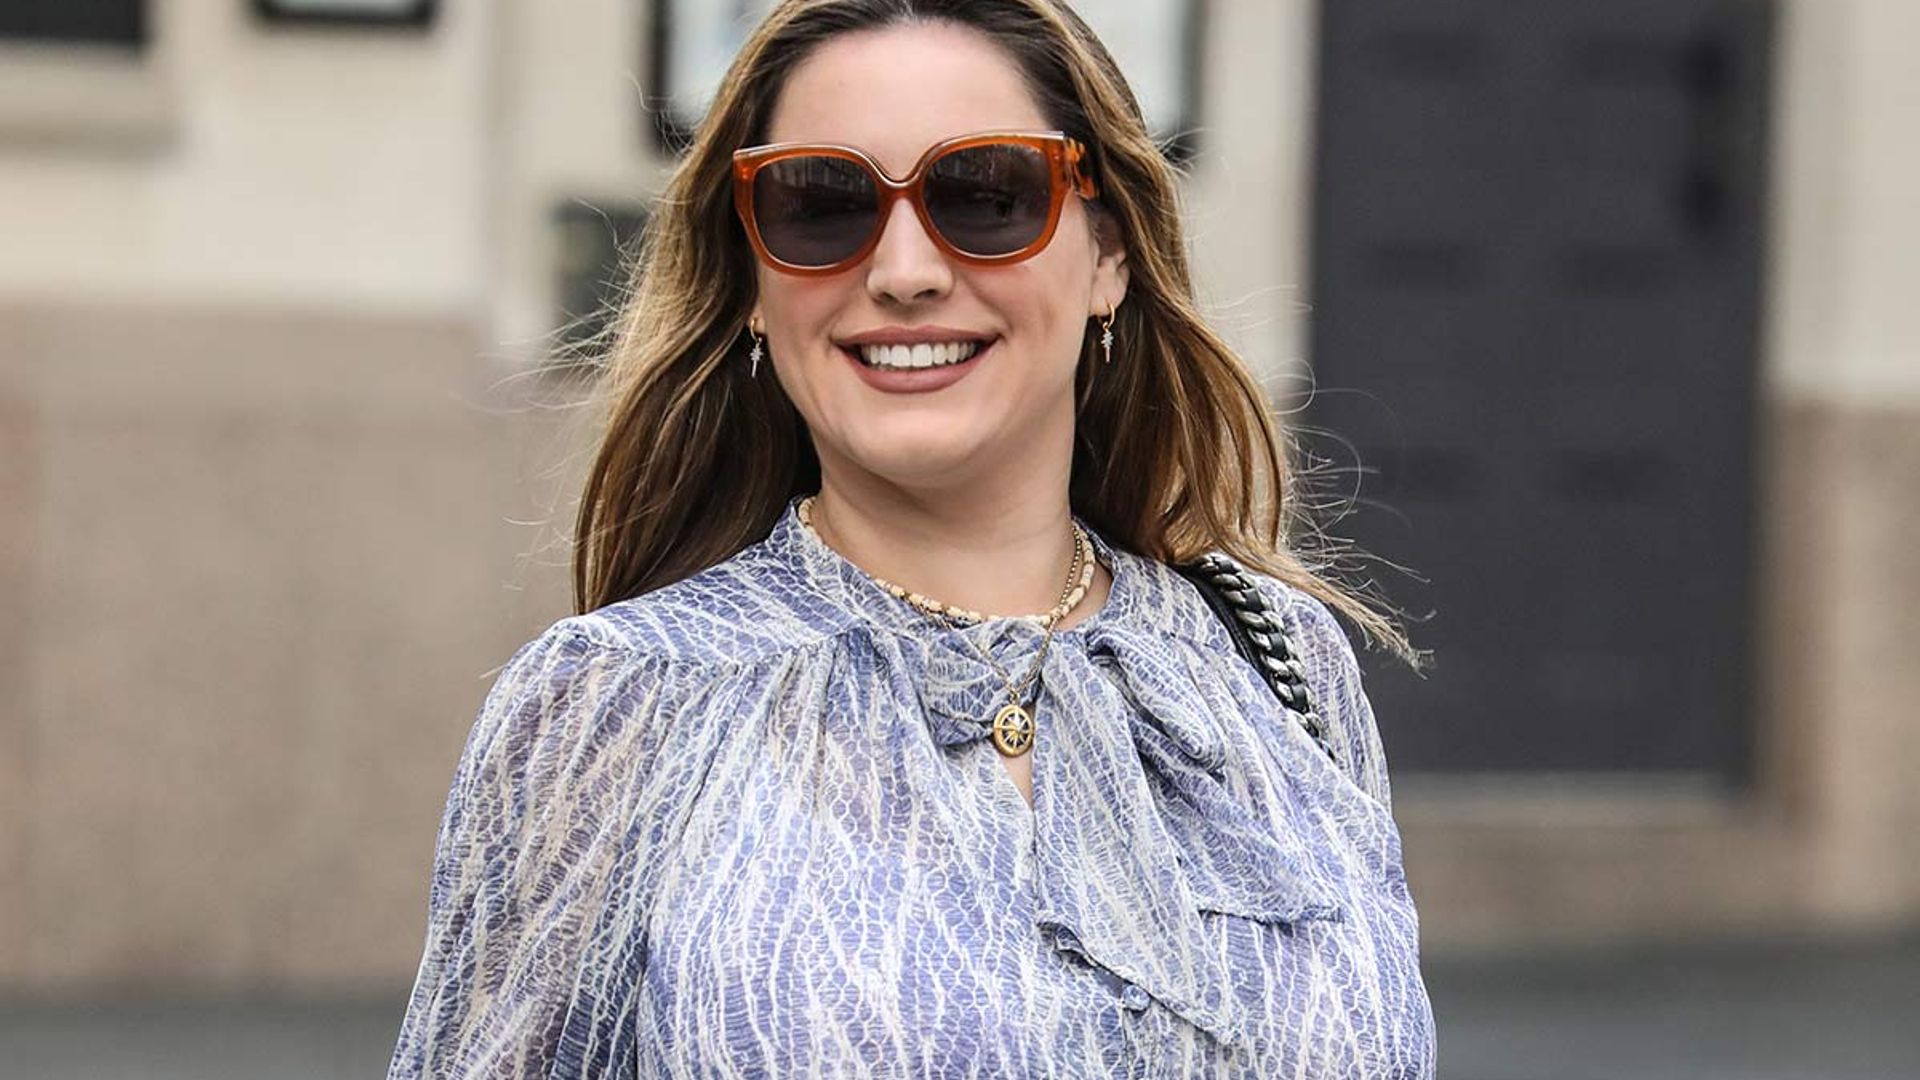 Kelly Brook's perfect skinny jeans are a bargain from Tesco